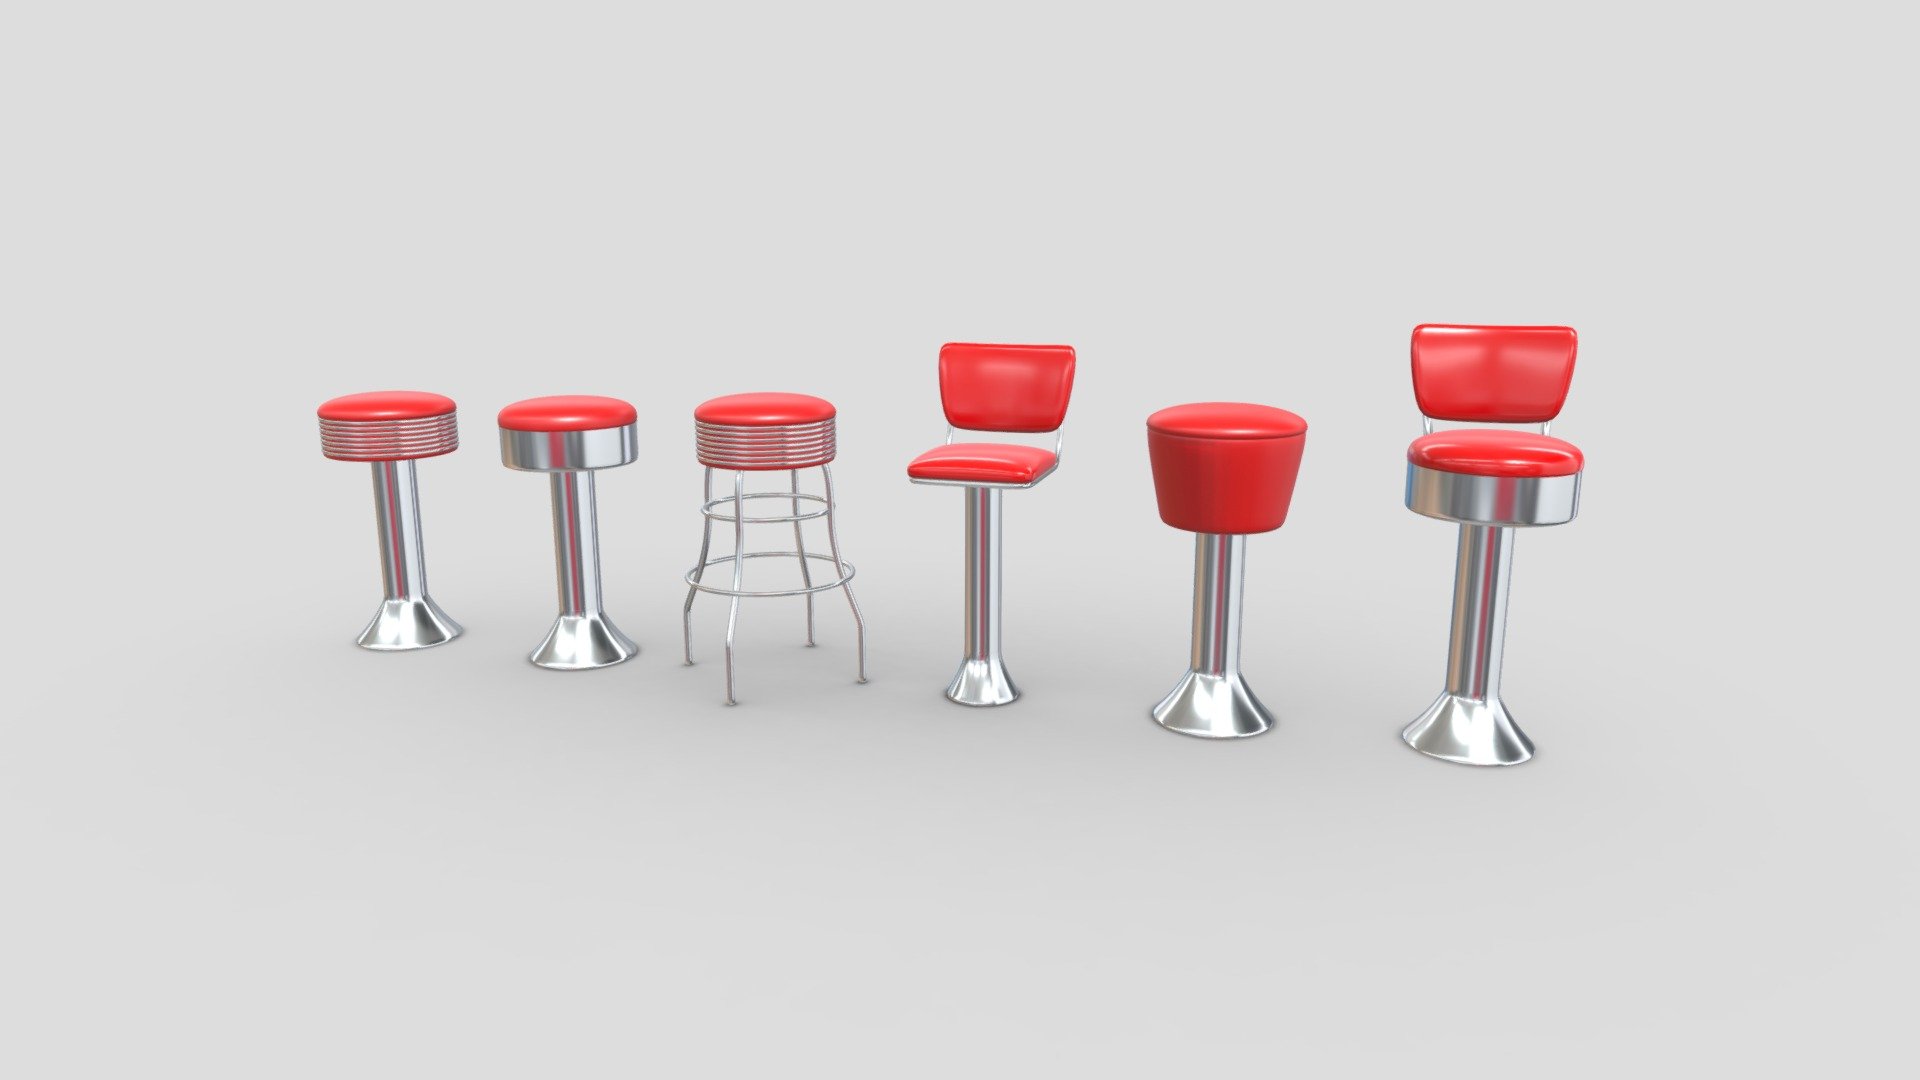 This is a collection of bar stool 3D models that I have made using Blender. Included are 6 bar stools that use a simple design and have a retro look. The models use metallic and plastic materials that have been baked into PBR textures.

Features:




Includes 6 retro bar stool 3D models

Made using 2K PBR textures in PNG format and uses the metalness workflow

Models manually UV unwrapped

Textures can be scaled down and edited

Blend files have pre-applied materials/textures with camera and lighting setups 

Models exported in FBX, OBJ, GLTF/GLB, DAE/Collada file formats 

Includes GLTF file type instructions and help document 

Includes rendered images, wireframes, and extras

Included Textures:




AO, Diffuse, Roughness, Gloss, Metallic

UVLayout

The source file is uploaded in FBX format and is used for demonstration. In the additional file you will find all model exports and the textures that go along with them.

Polygon Counts

 - Retro Bar Stool Collection - Buy Royalty Free 3D model by Pickle55100 3d model